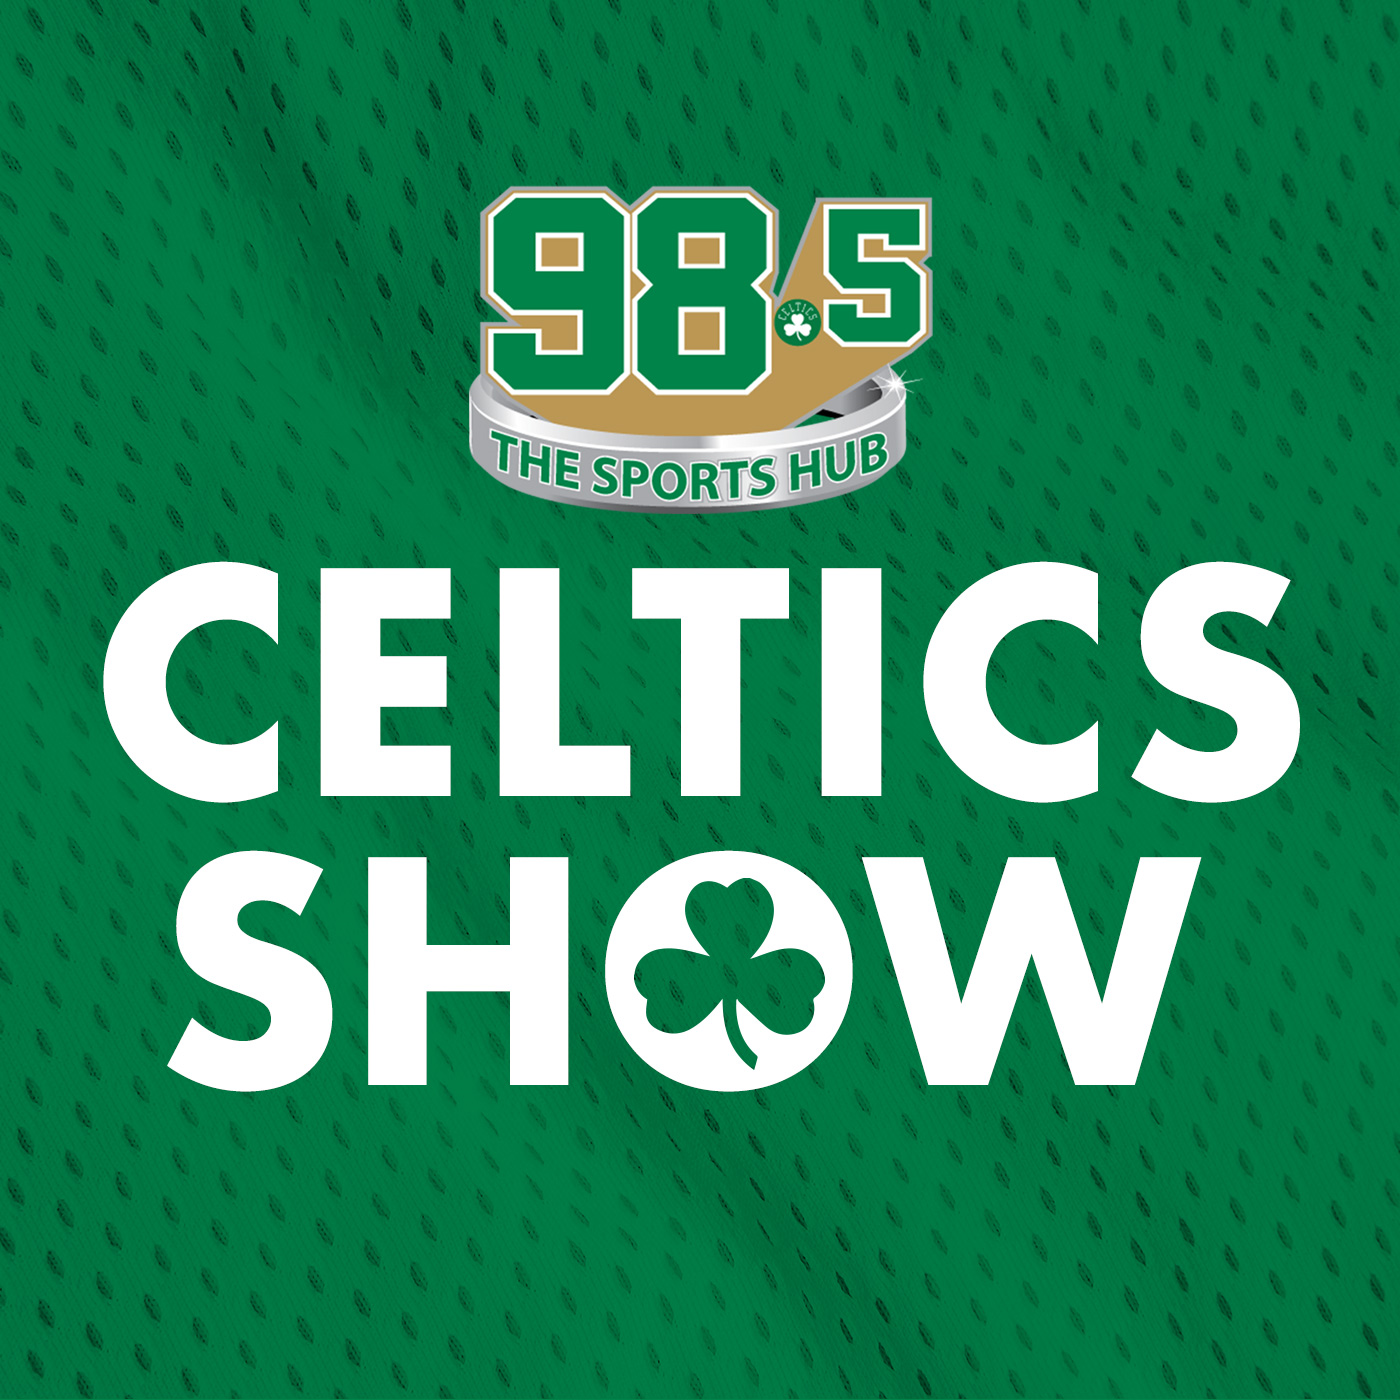 Celtics-76ers Game 7 preview // Jaylen Brown wants fans to bring it in Game 7 // Joe Mazzulla's adjustments